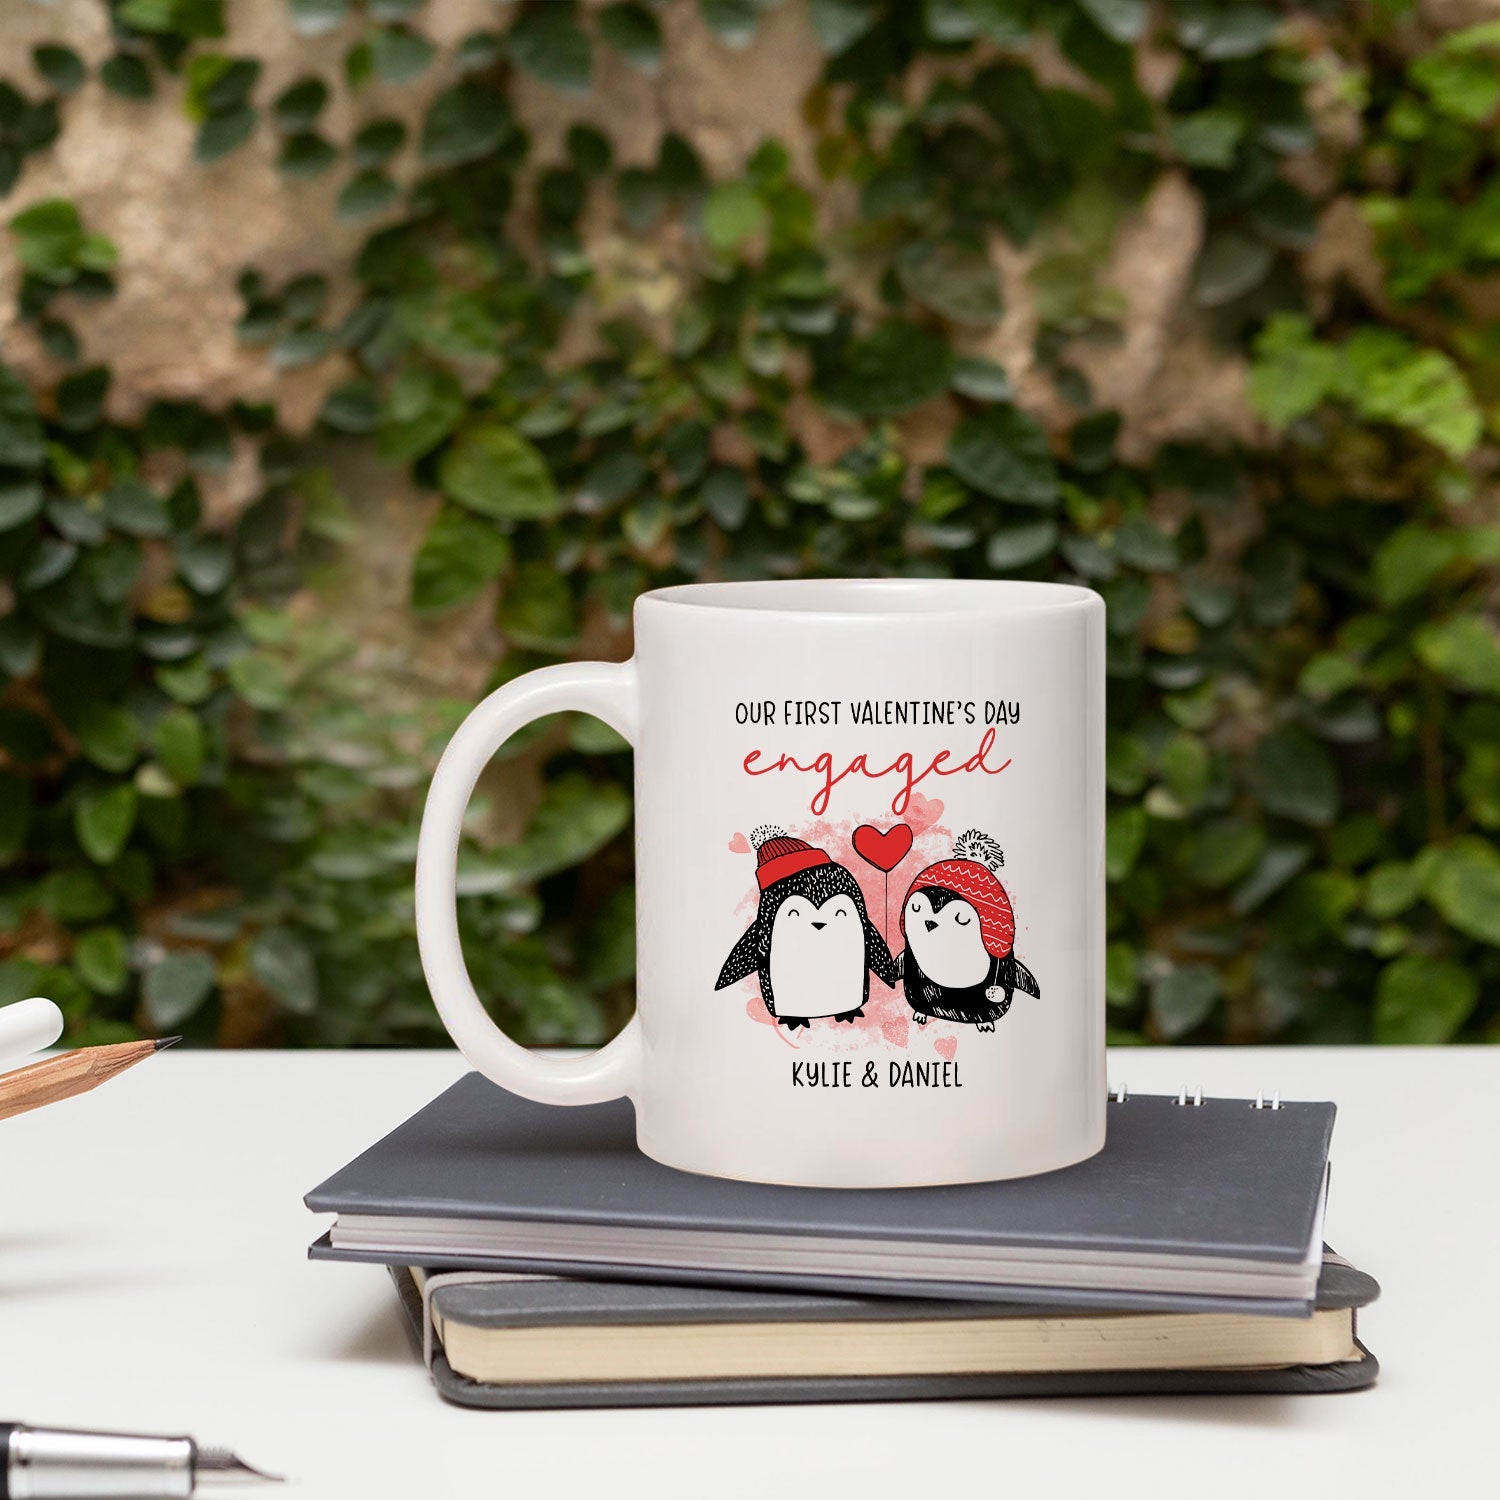 Our First Valentine's Day Engaged - Personalized First Valentine's Day gift For Fiance - Custom Mug - MyMindfulGifts